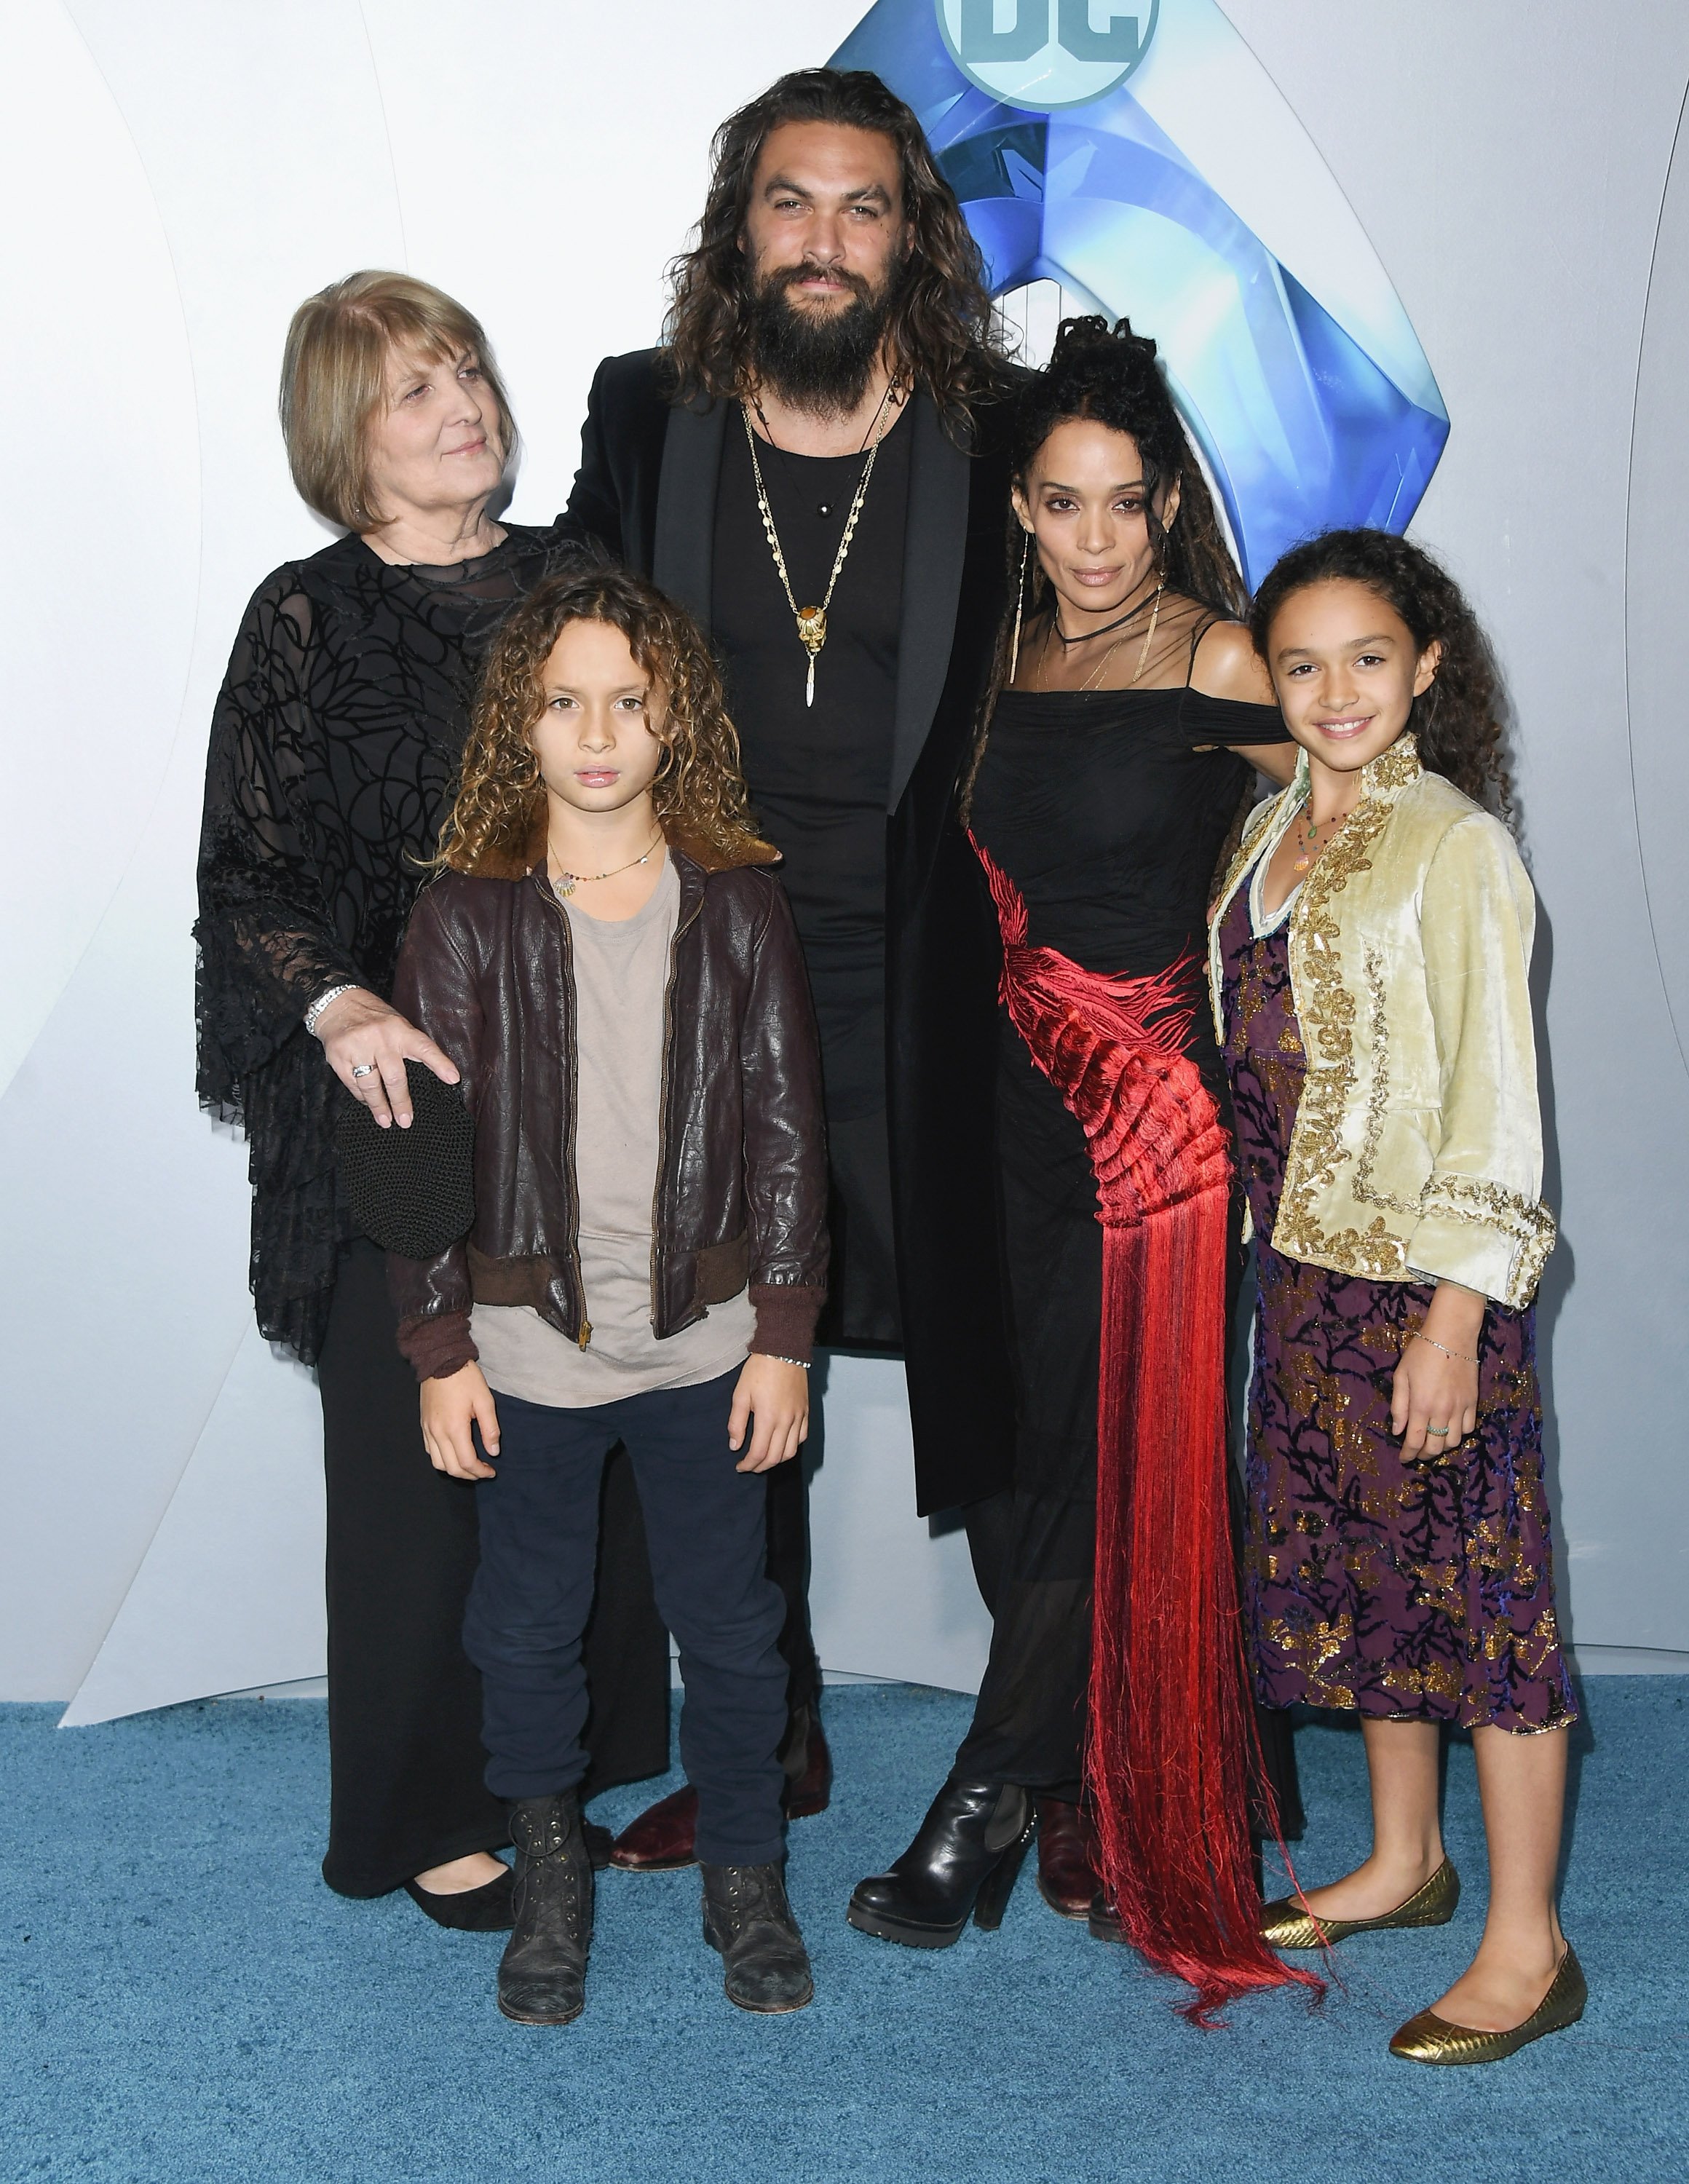 Jason Momoa, his mother Coni Momoa, Lisa Bonet & their kids, Lola and Nakoa-Wolf at the premiere of “Aquaman” in Hollywood on Dec. 12, 2018. | Photo: Getty Images